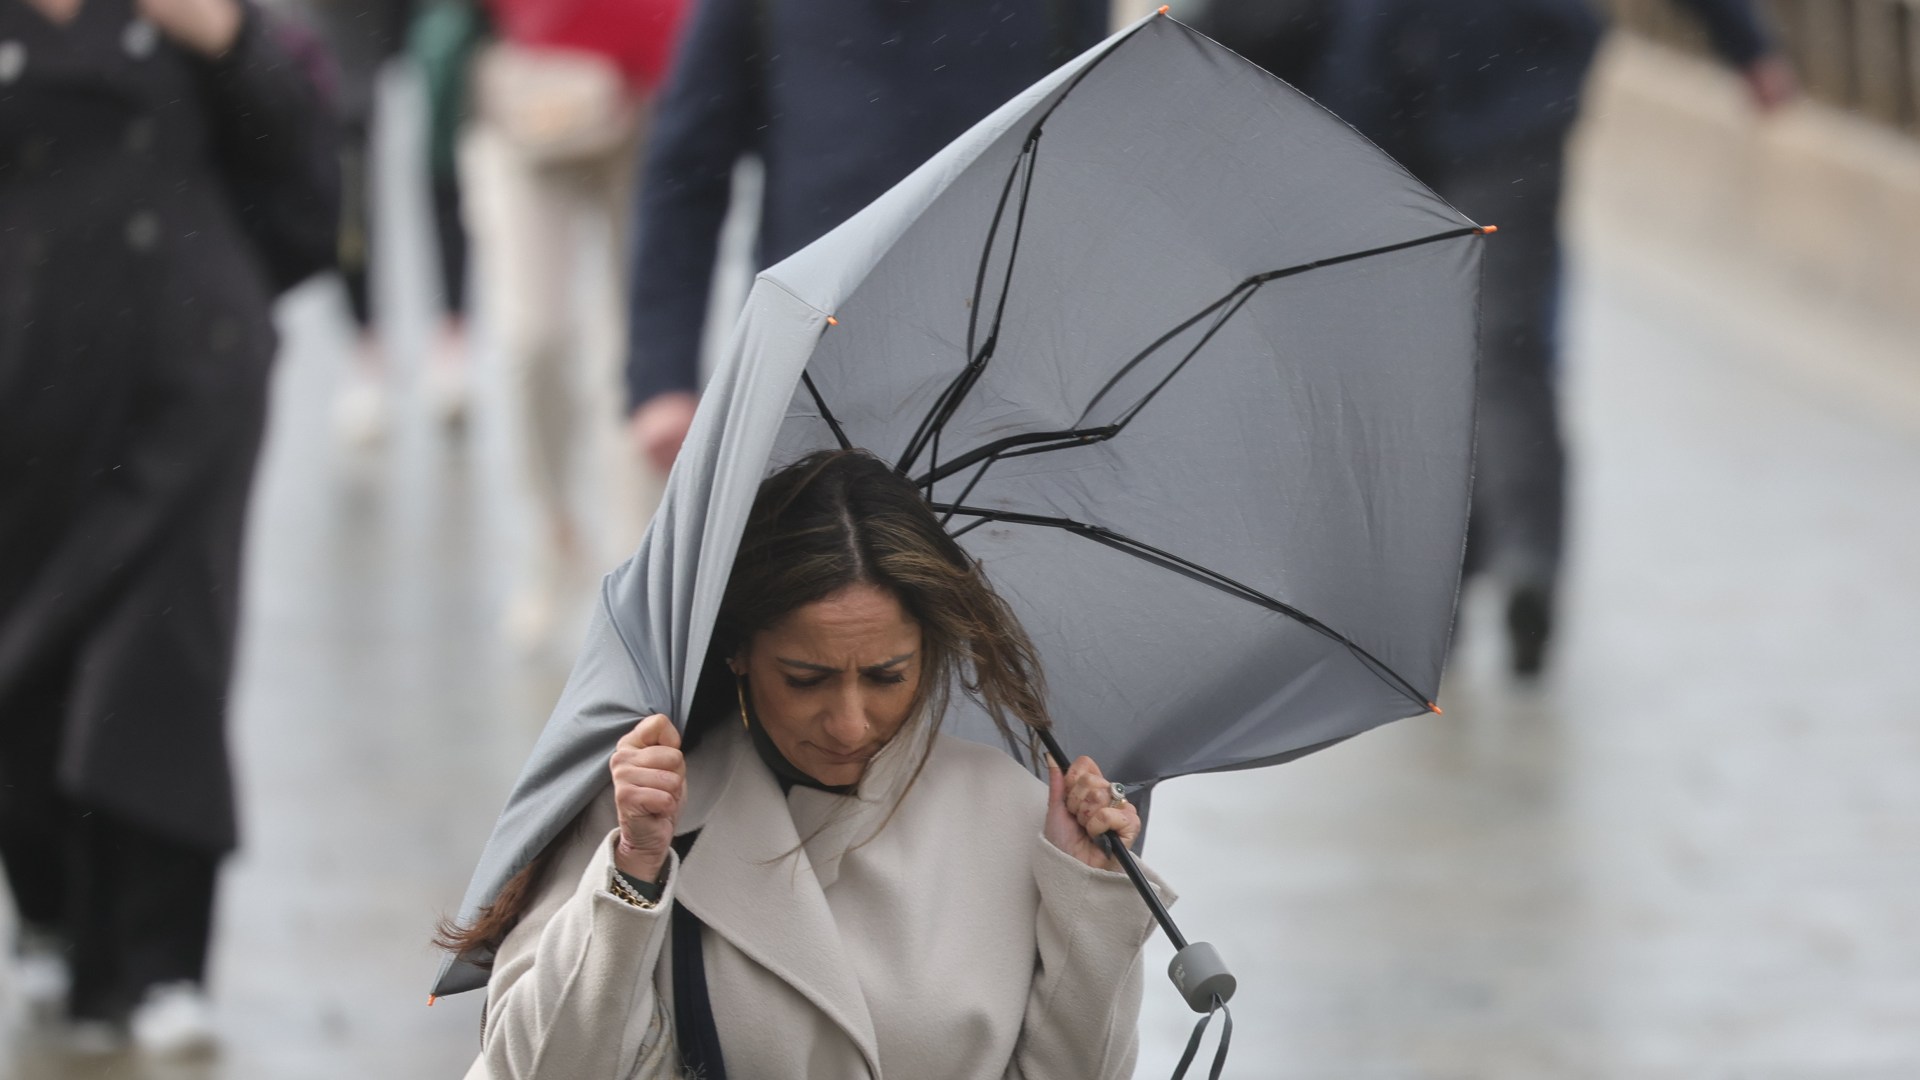 UK weather: Met Office issues yellow warning for severe 55mph winds set to cause travel chaos and power cuts [Video]